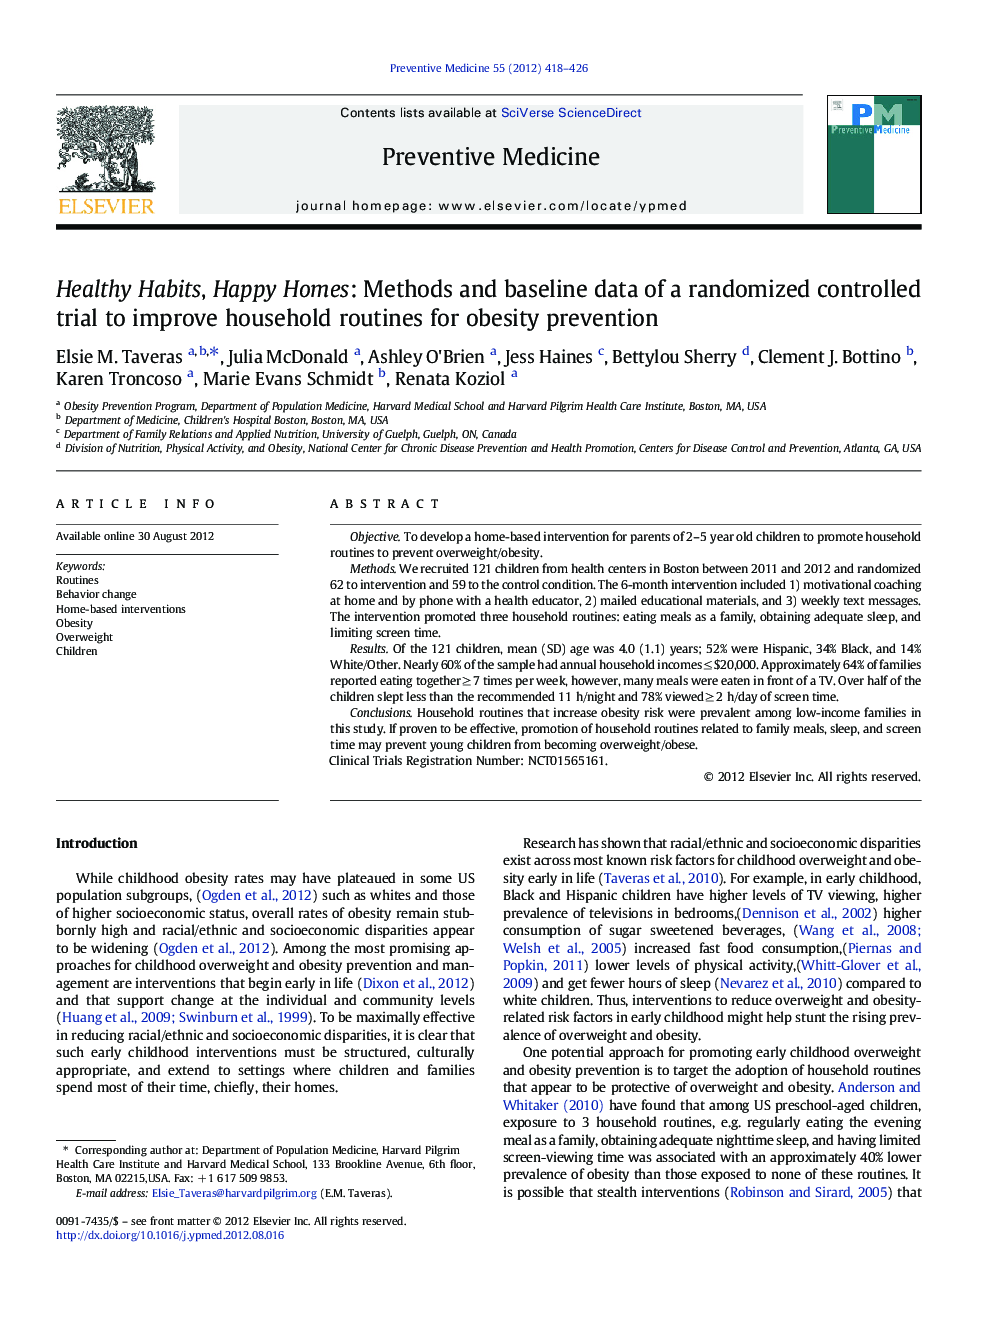 Healthy Habits, Happy Homes: Methods and baseline data of a randomized controlled trial to improve household routines for obesity prevention